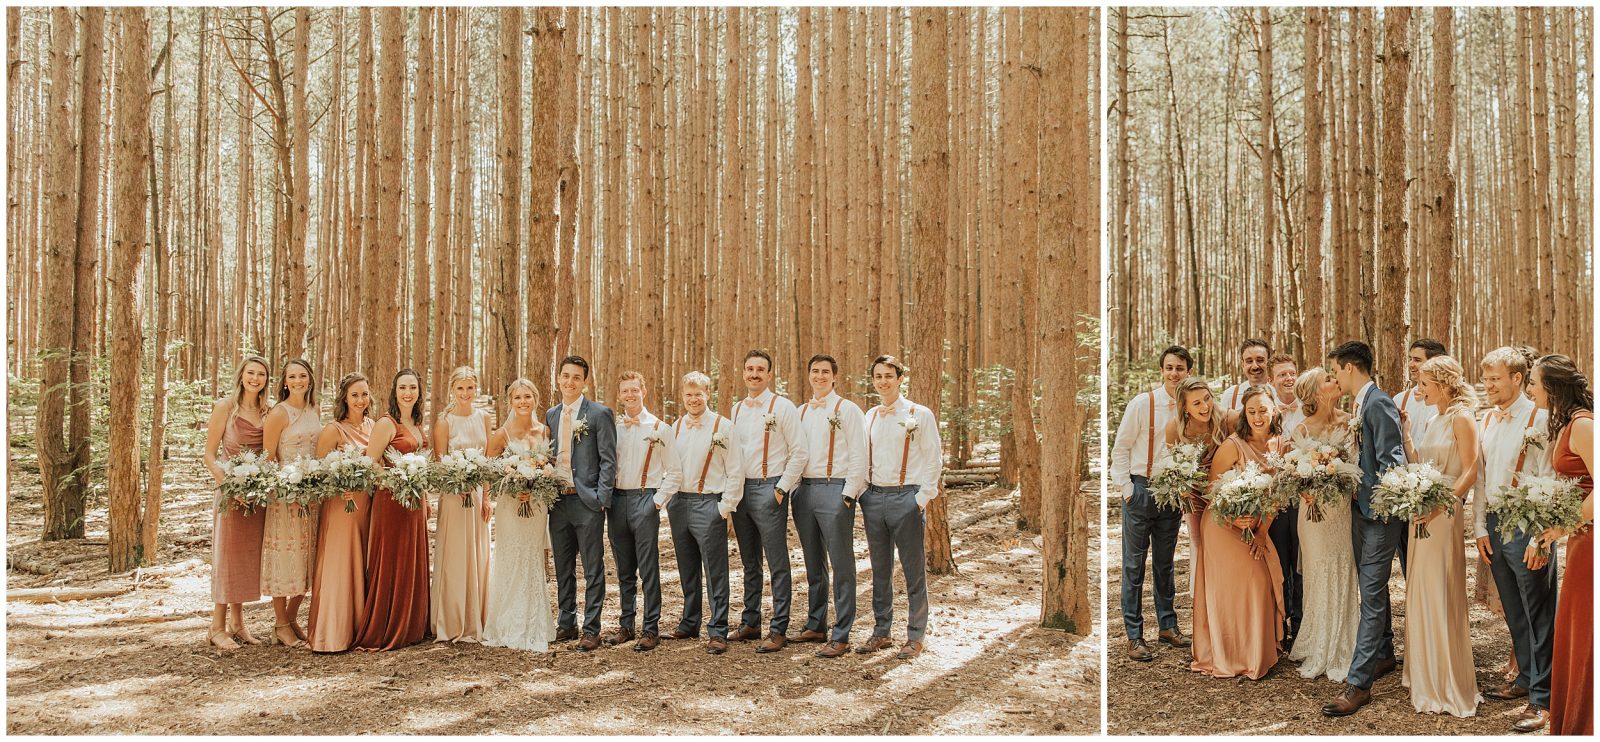 Wedding Party Photos in Forest